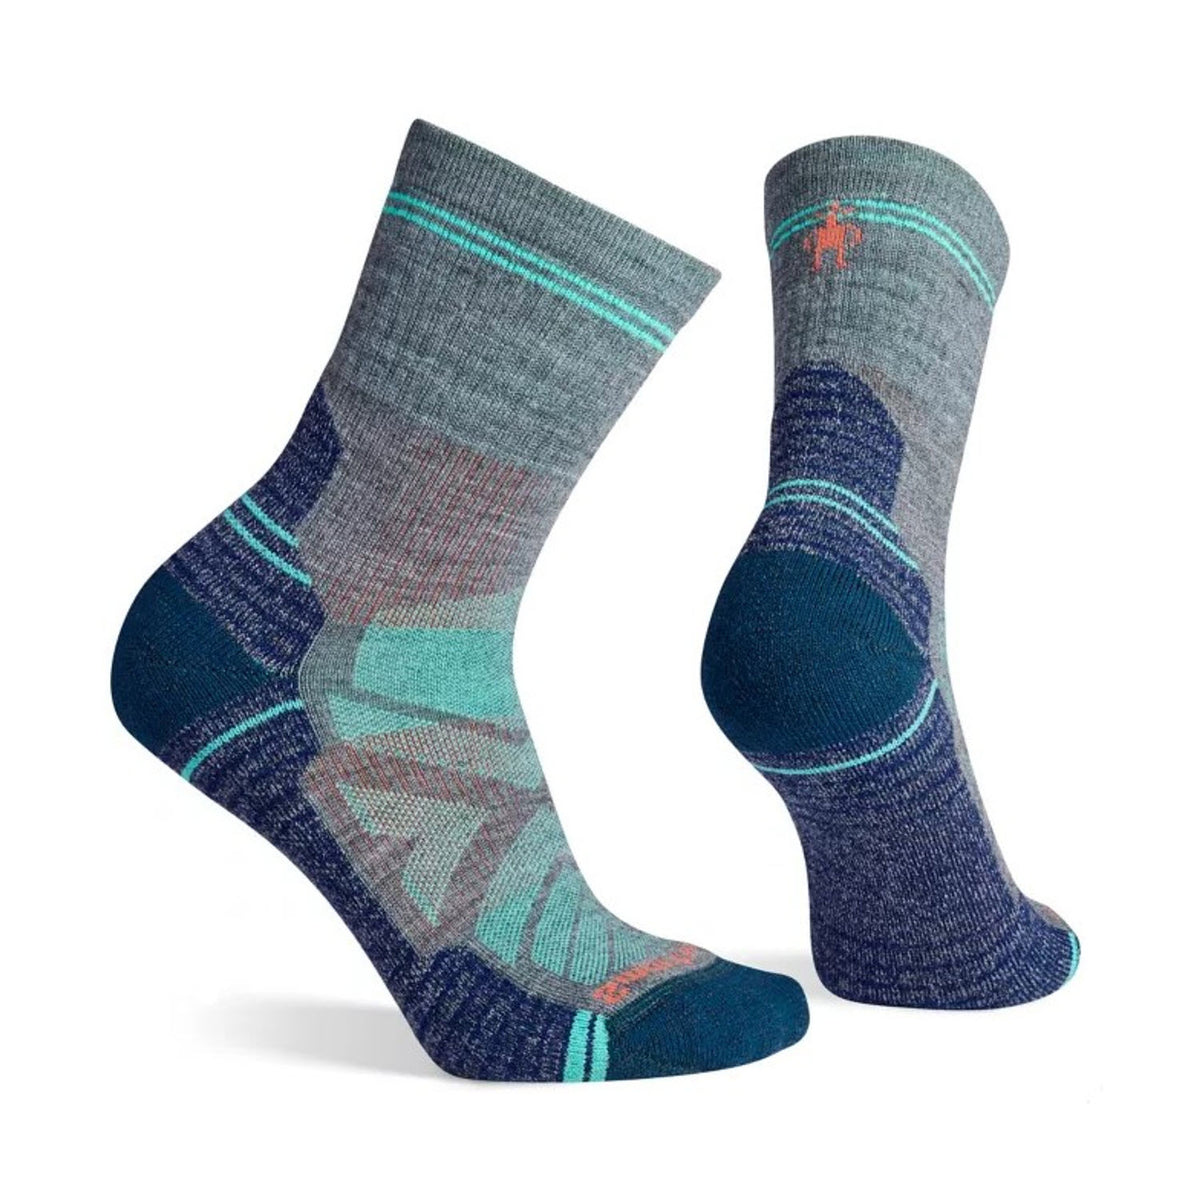 Two multi-colored Smartwool Hike Mid Crew socks standing upright against a white background, featuring shades of blue, gray, and orange with geometric patterns.